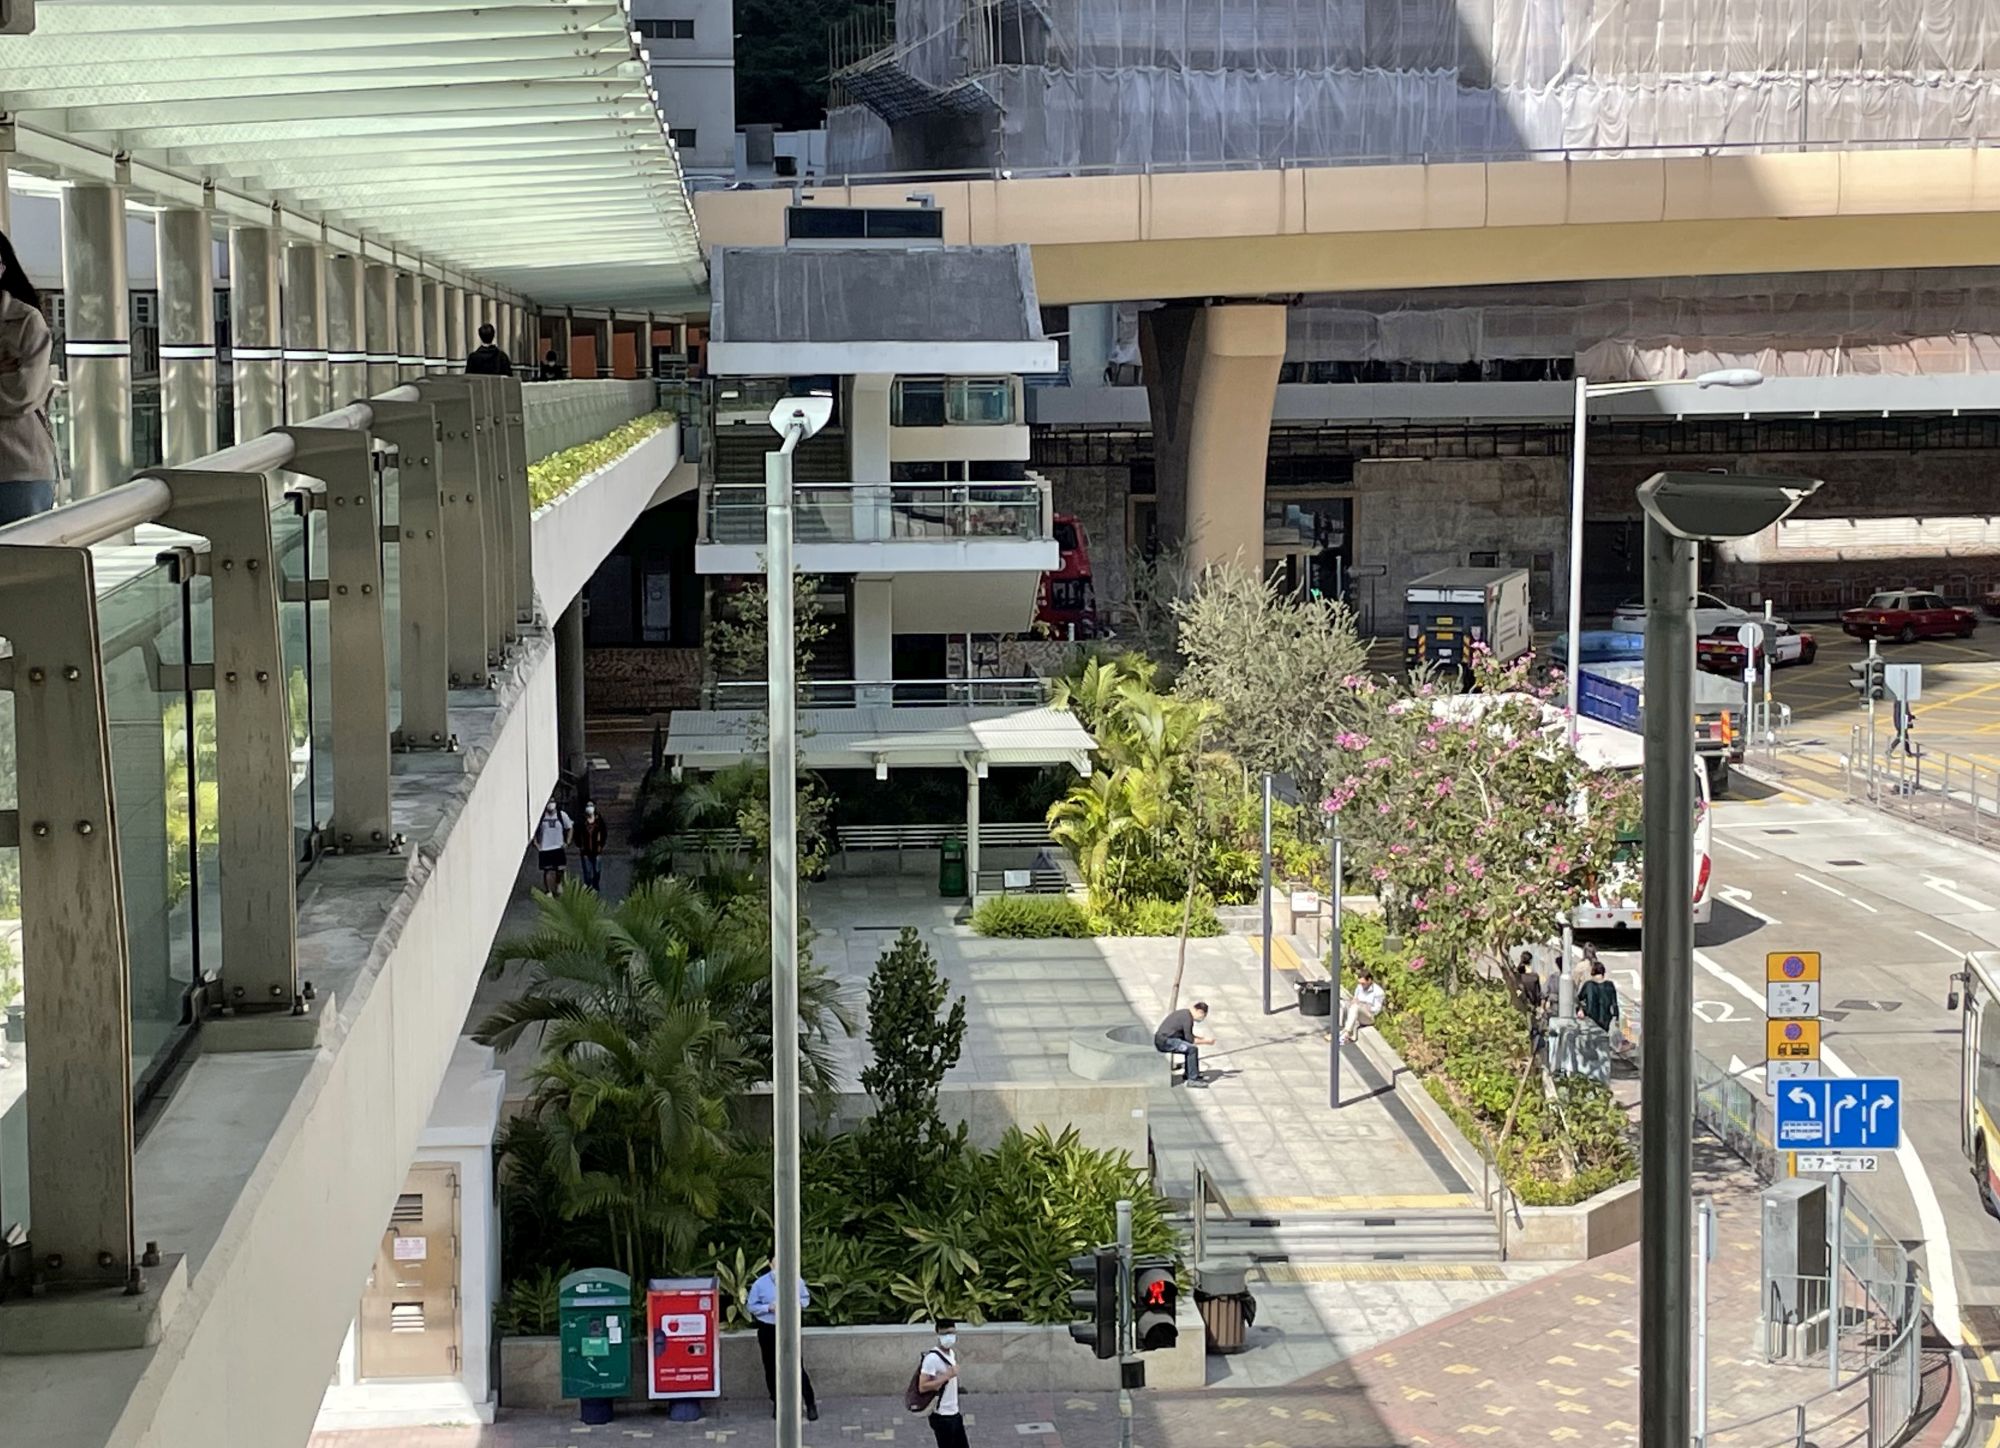 The “Green Link in Wong Chuk Hang” is a place-making project aimed at connecting MTR Wong Chuk Hang Station and Aberdeen Country Park through a series of sitting-out areas and pedestrian facilities, by making use of the concept of a green spine. The project includes improvements to Nam Long Shan Road Sitting-out Area.